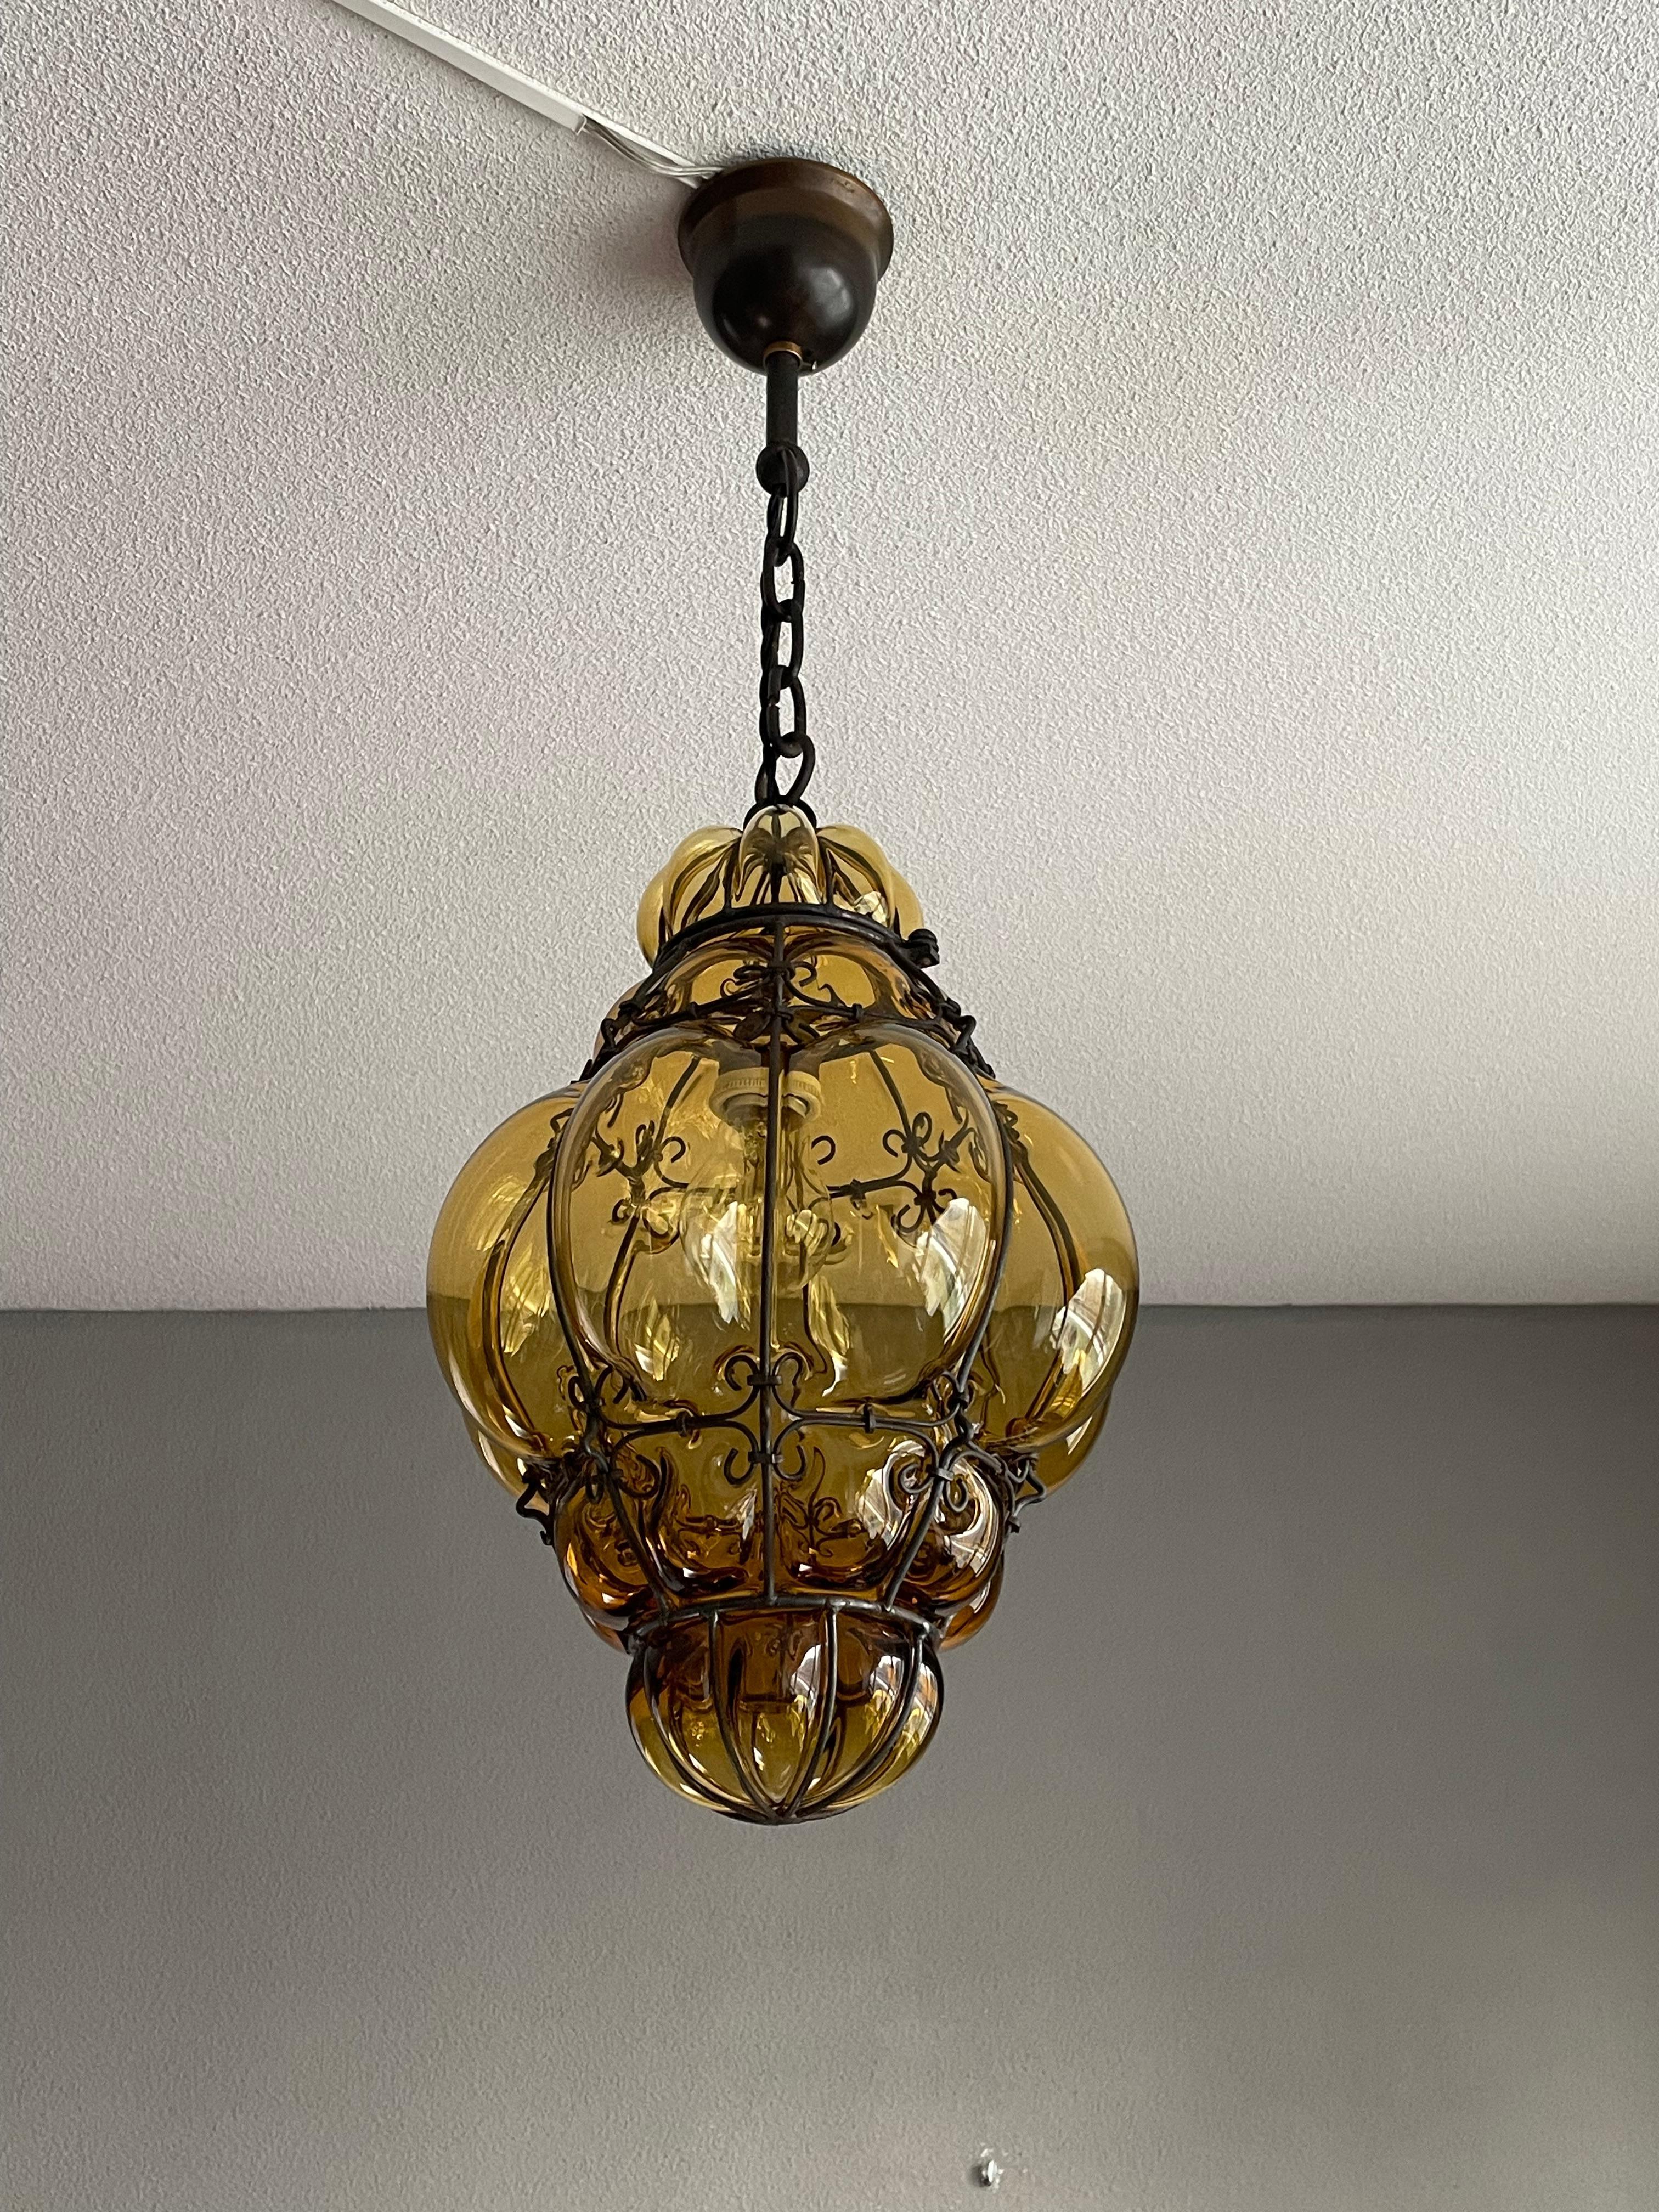 Blackened Antique Venetian Murano Pendant Light Mouthblown Glass into a Wrought Iron Frame For Sale